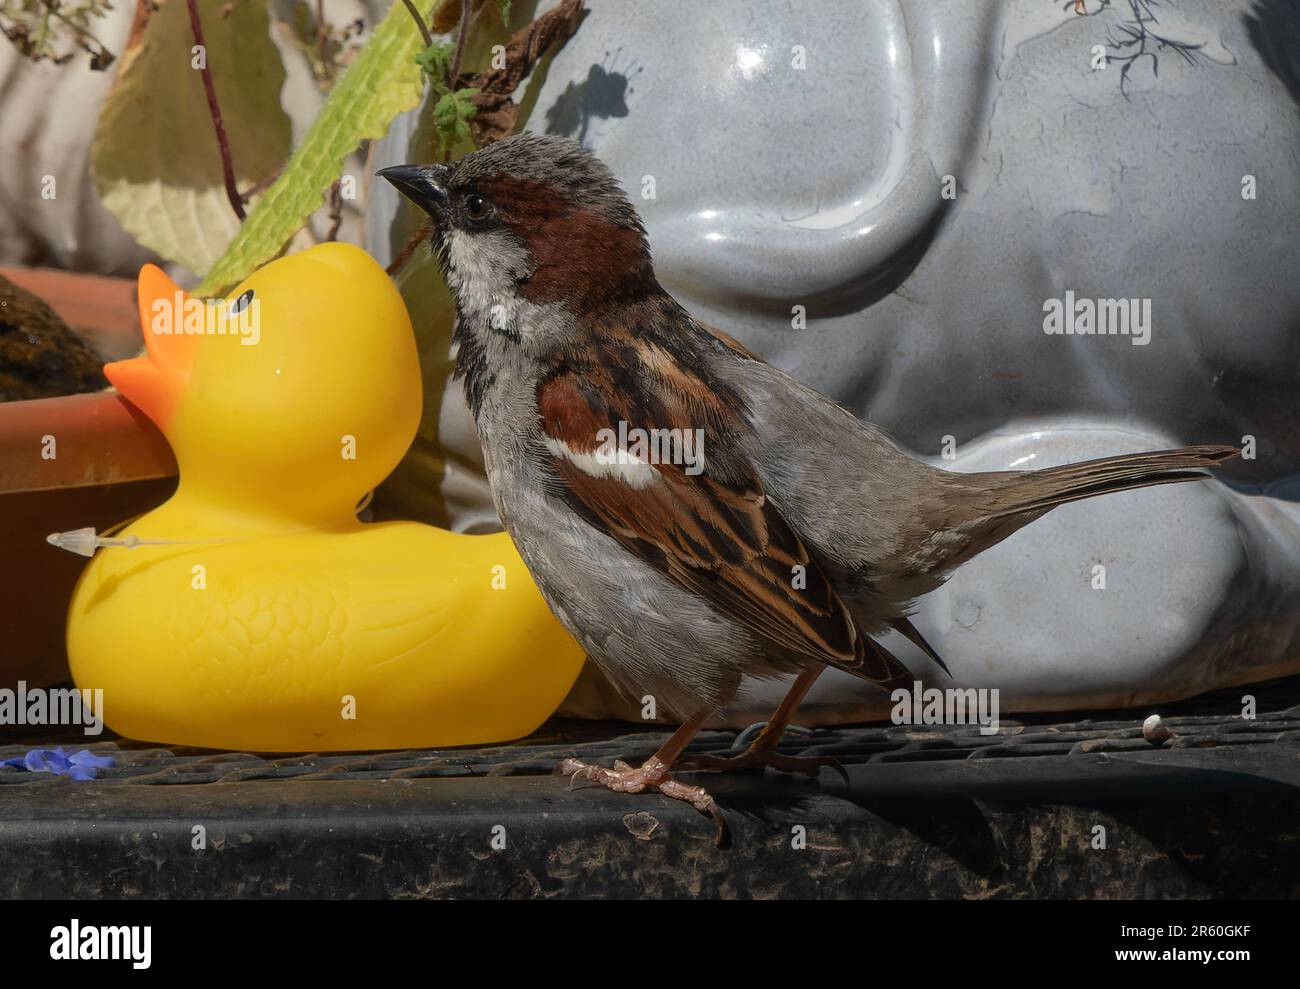 A Sparrow meets a rubber duckie Stock Photo